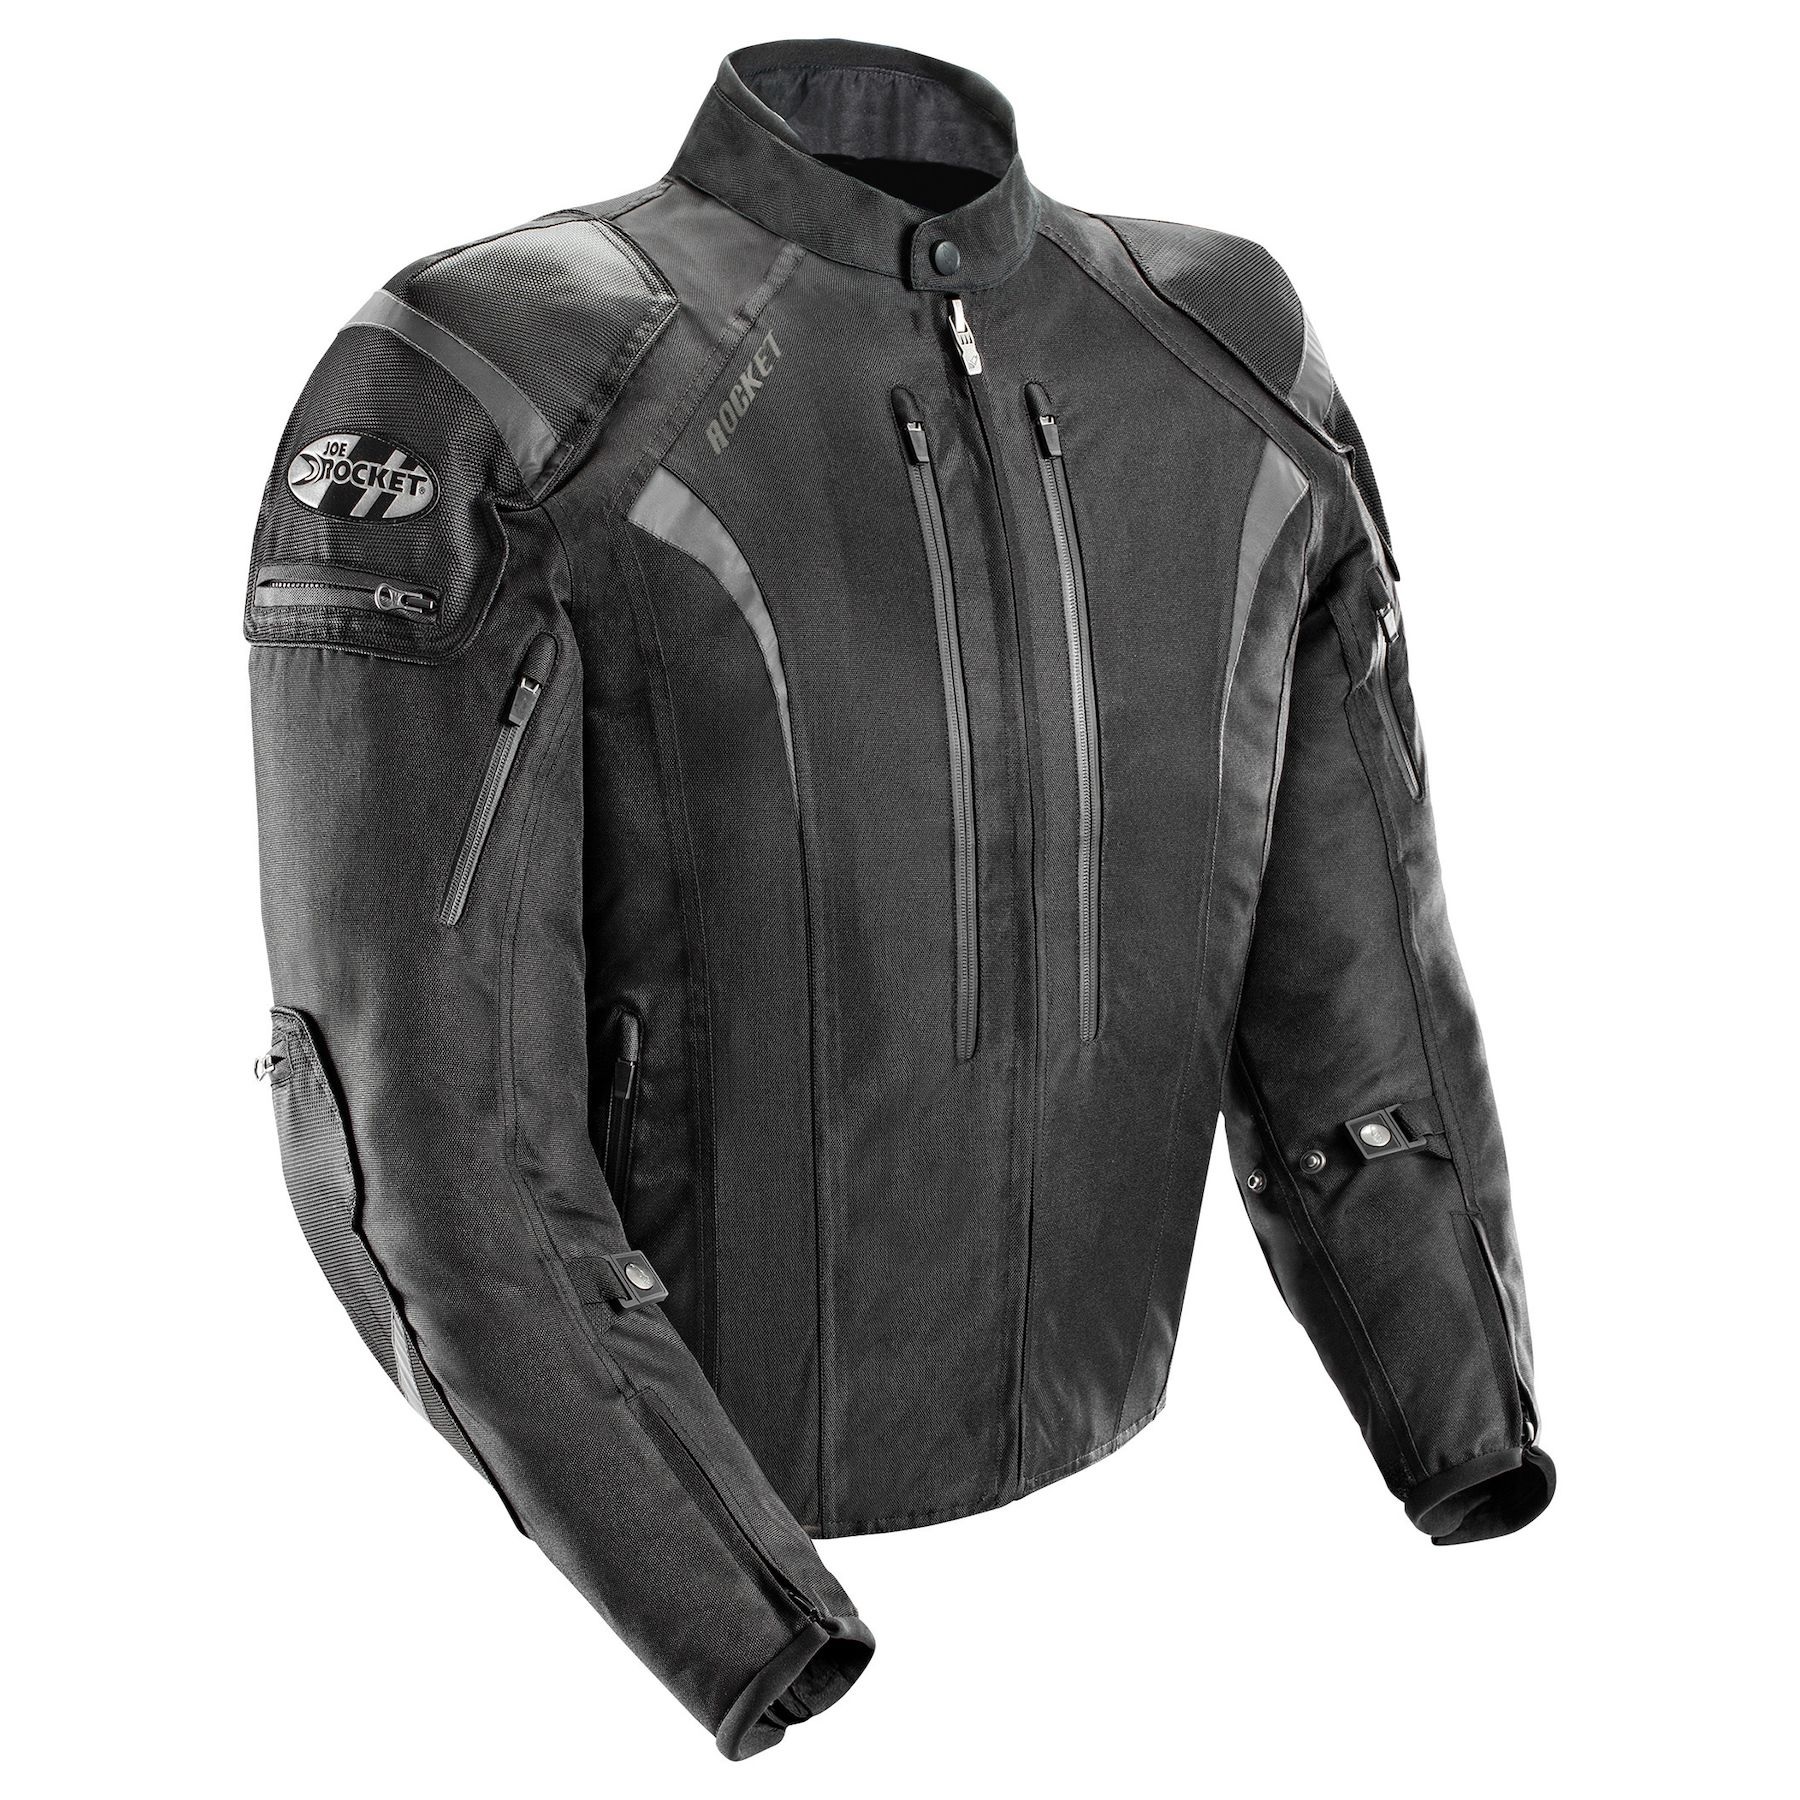 The Best Motorcycle Jackets You Can, Best Leather Motorcycle Jackets 2021